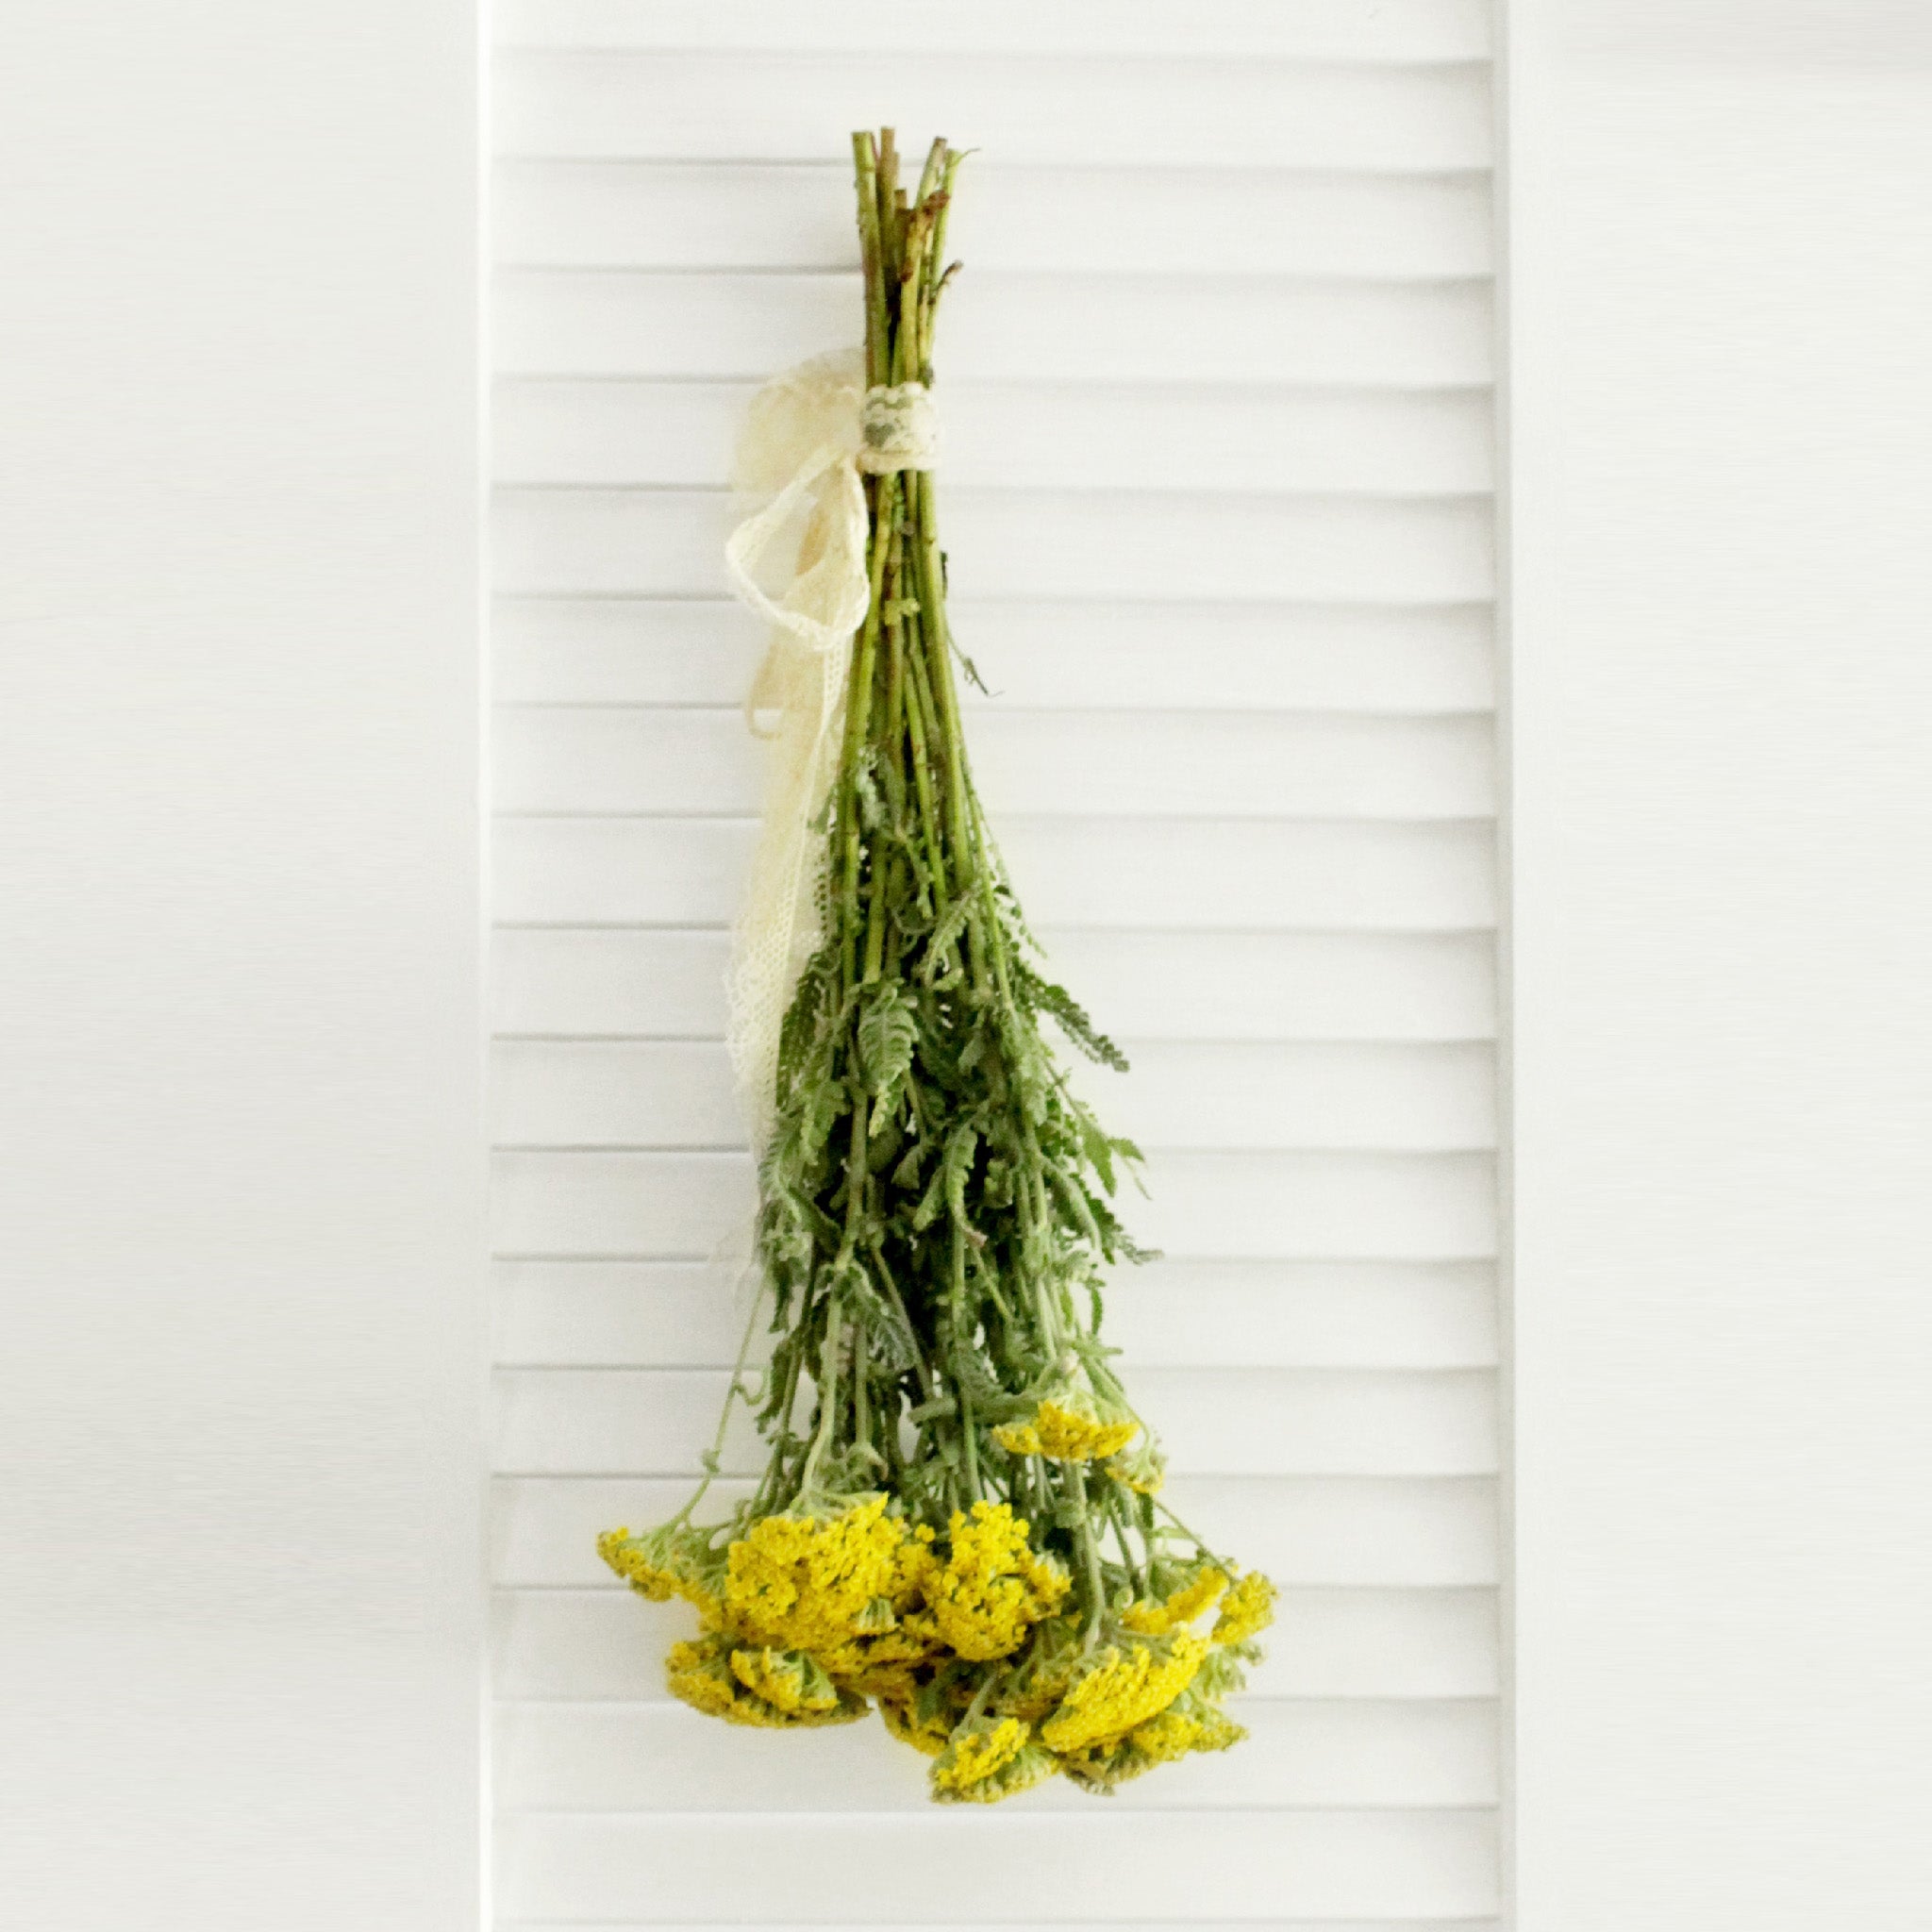 Yarrow Cottage Yellow 8-10 stems (free shipping) - DIY Wedding | Showers | Event | Holidays